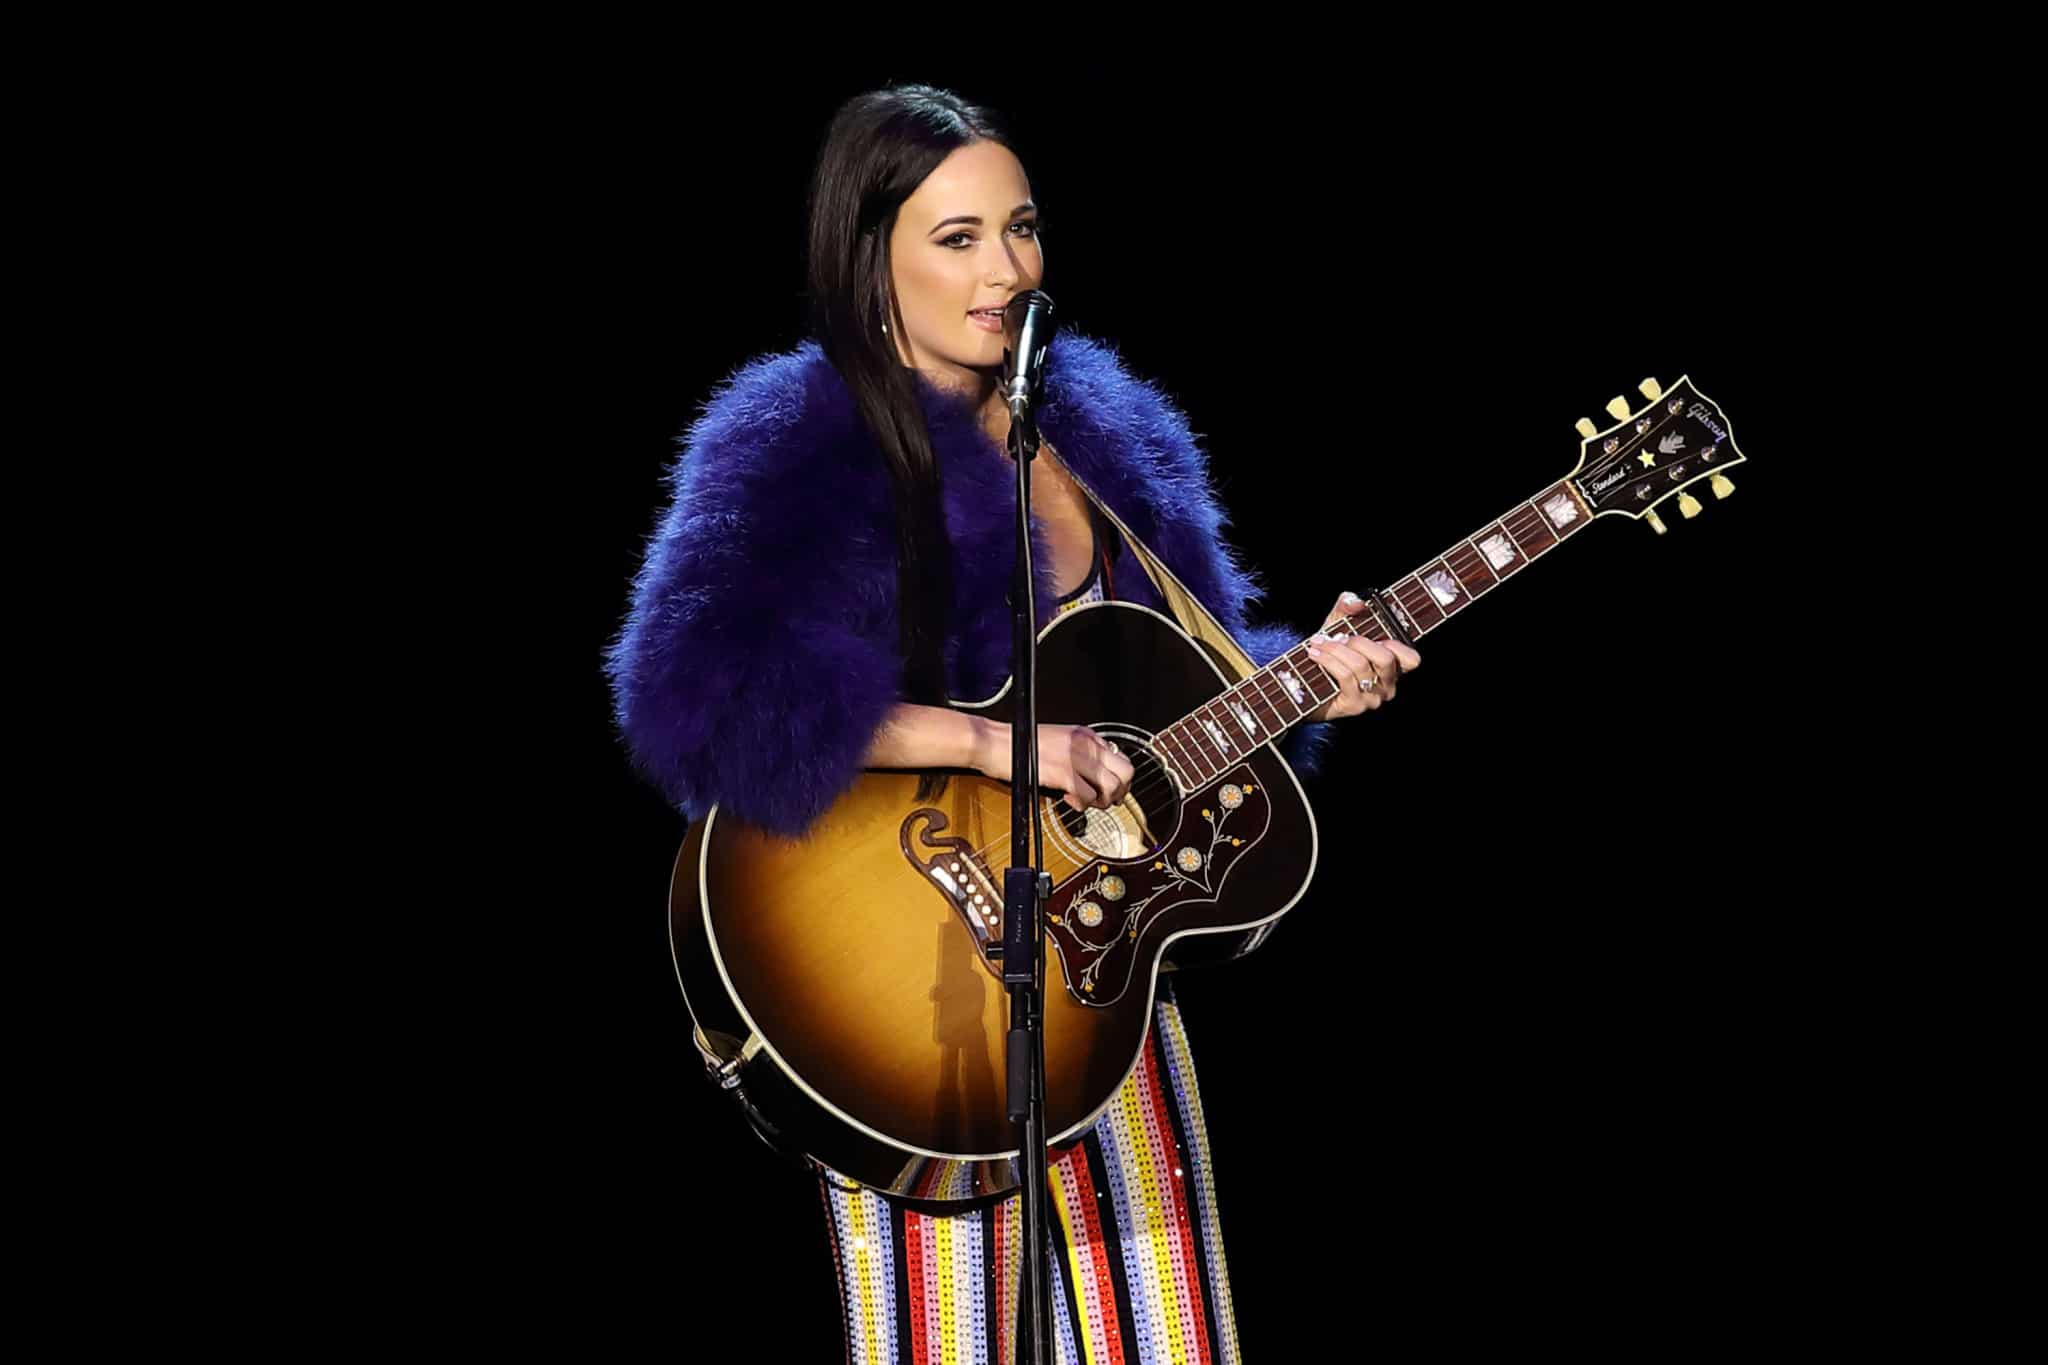 Kacey Musgraves was born and raised in Texas